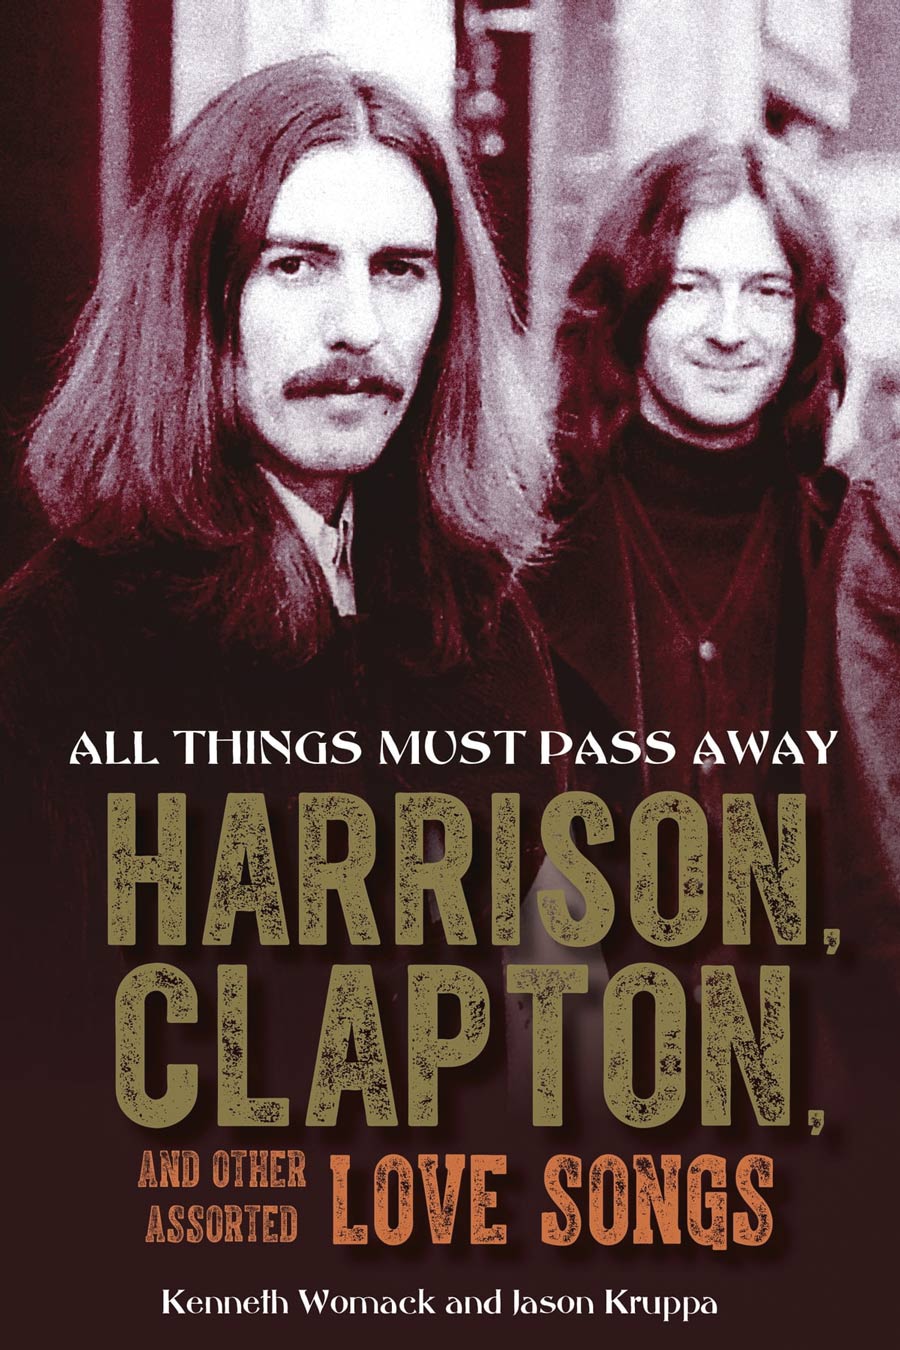 Book titled "All Things Must Pass Away: Harrison, Clapton, and Other Assorted Love Songs." by Kenneth Womack and Jason Kruppa